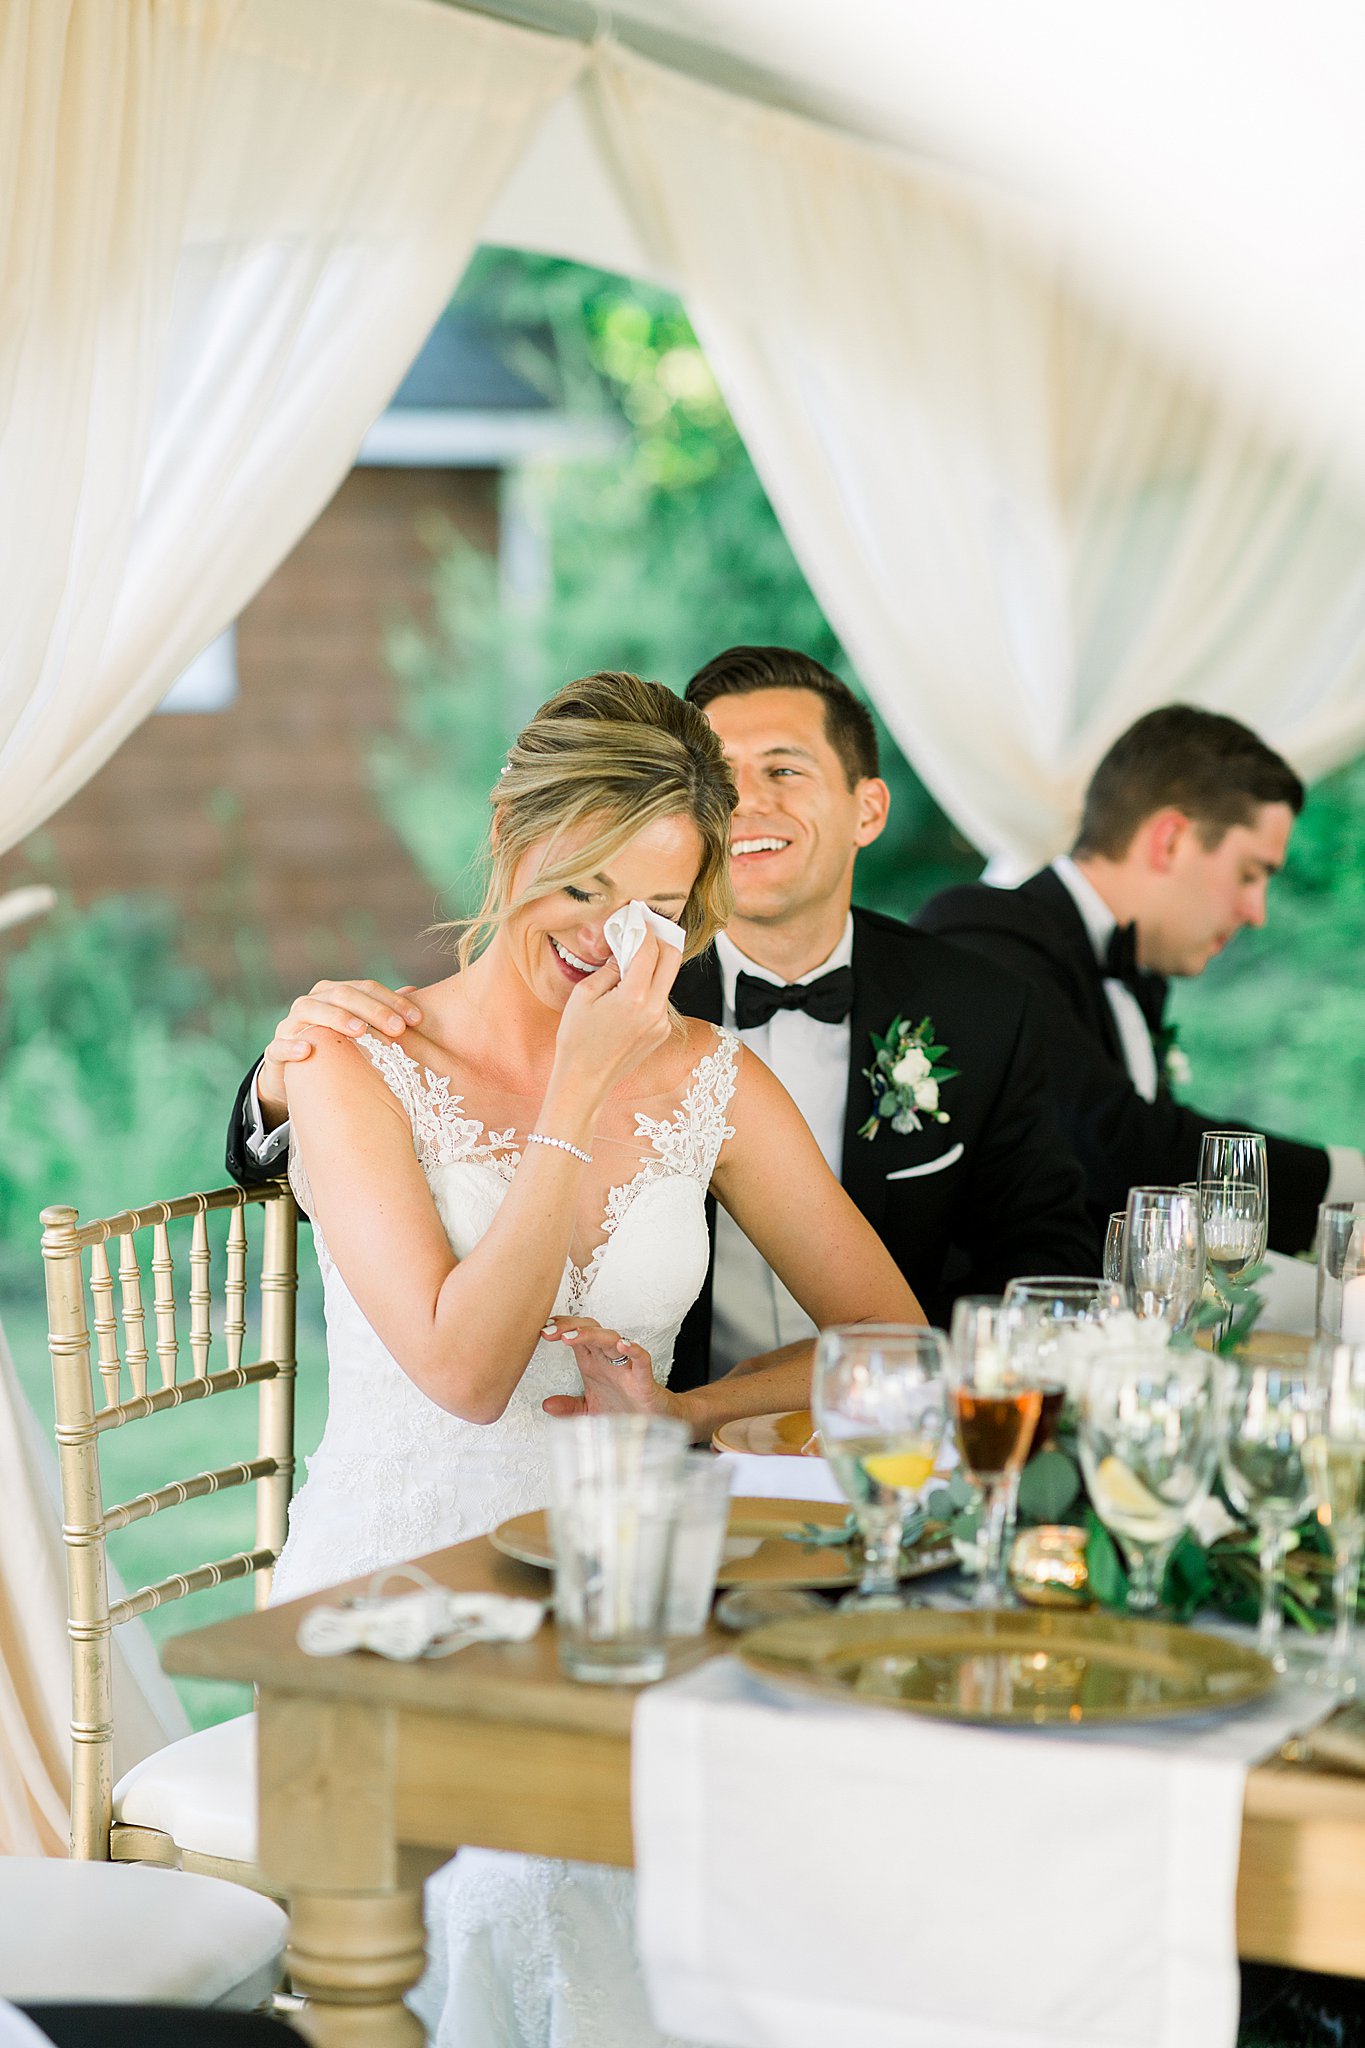 Bride cries during sister's toast during her intimate Lake Michigan wedding reception.